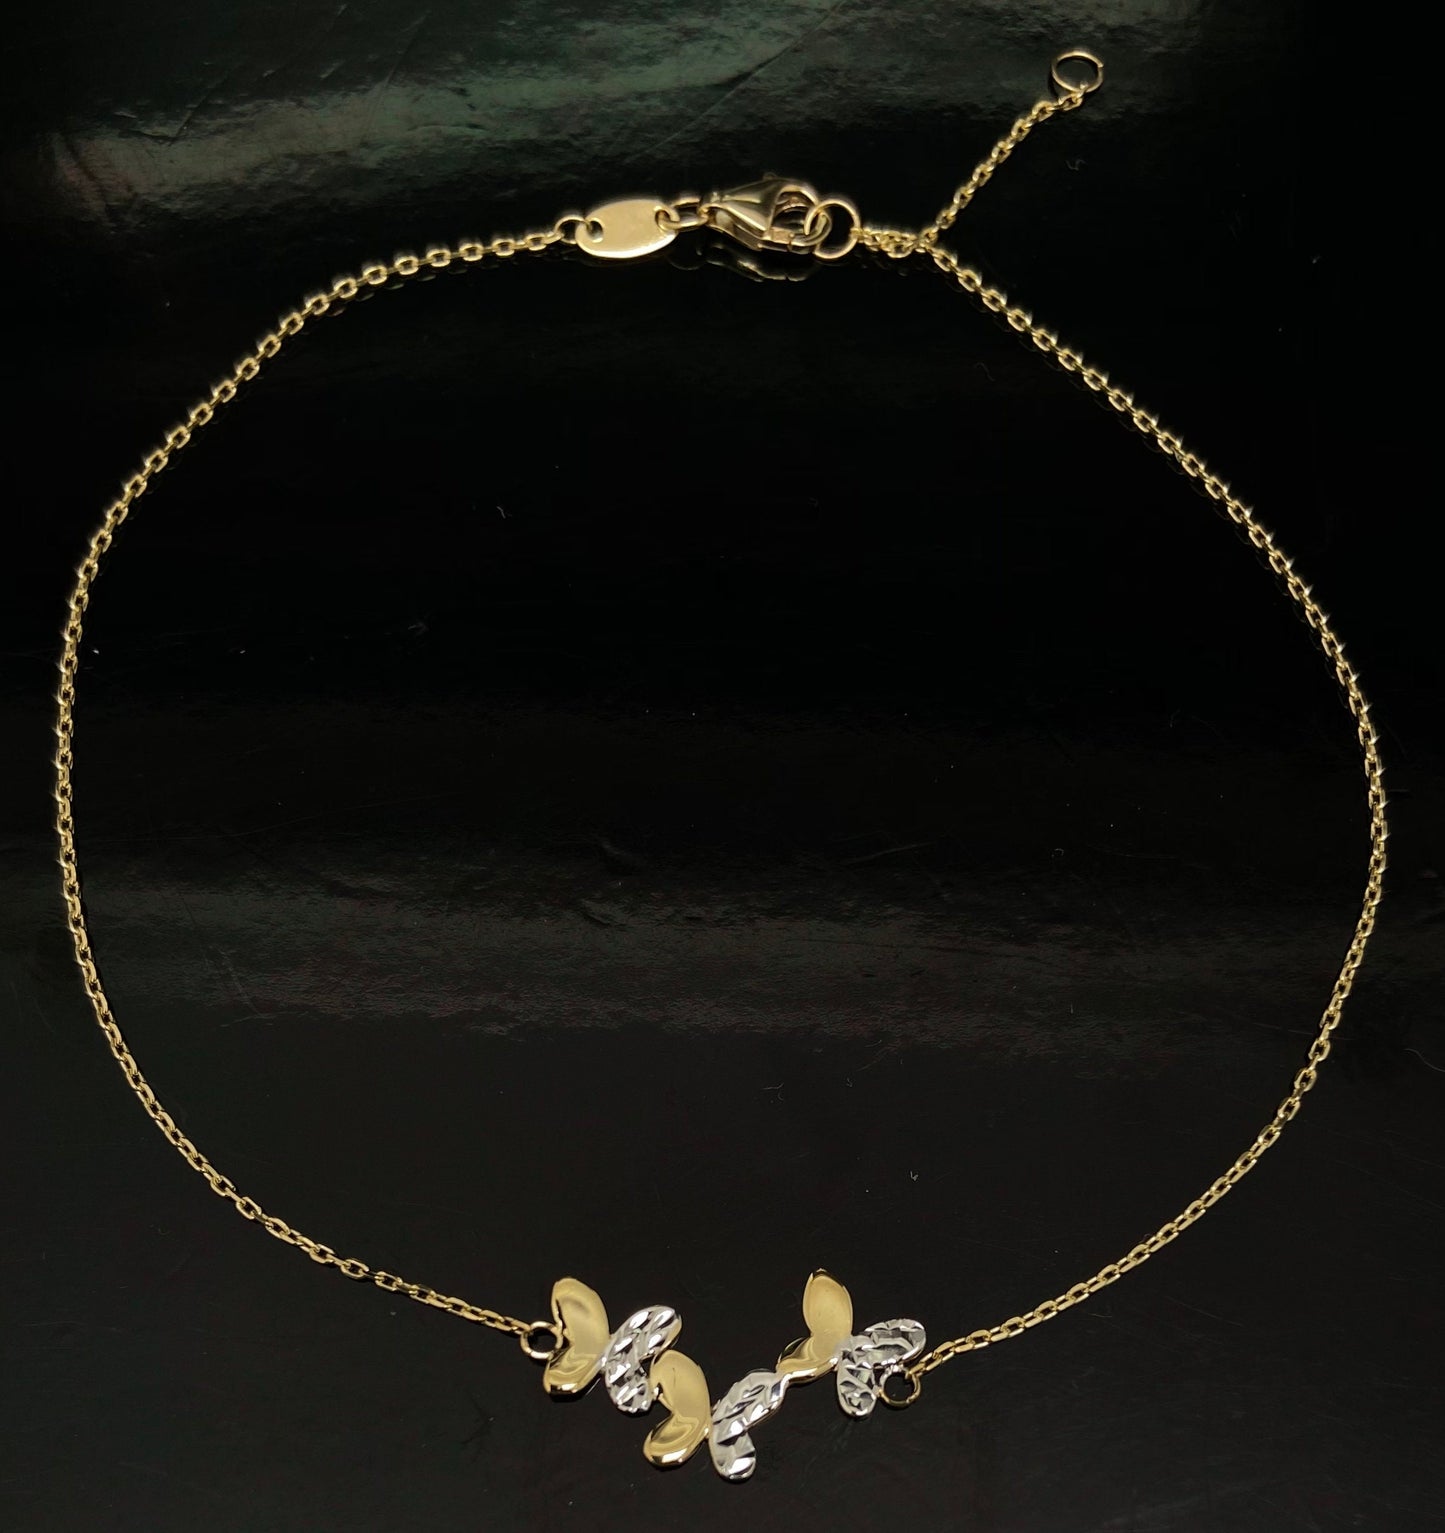 Yellow Gold 3 Triple Butterfly Station Adjustable Chain Anklet Bracelet